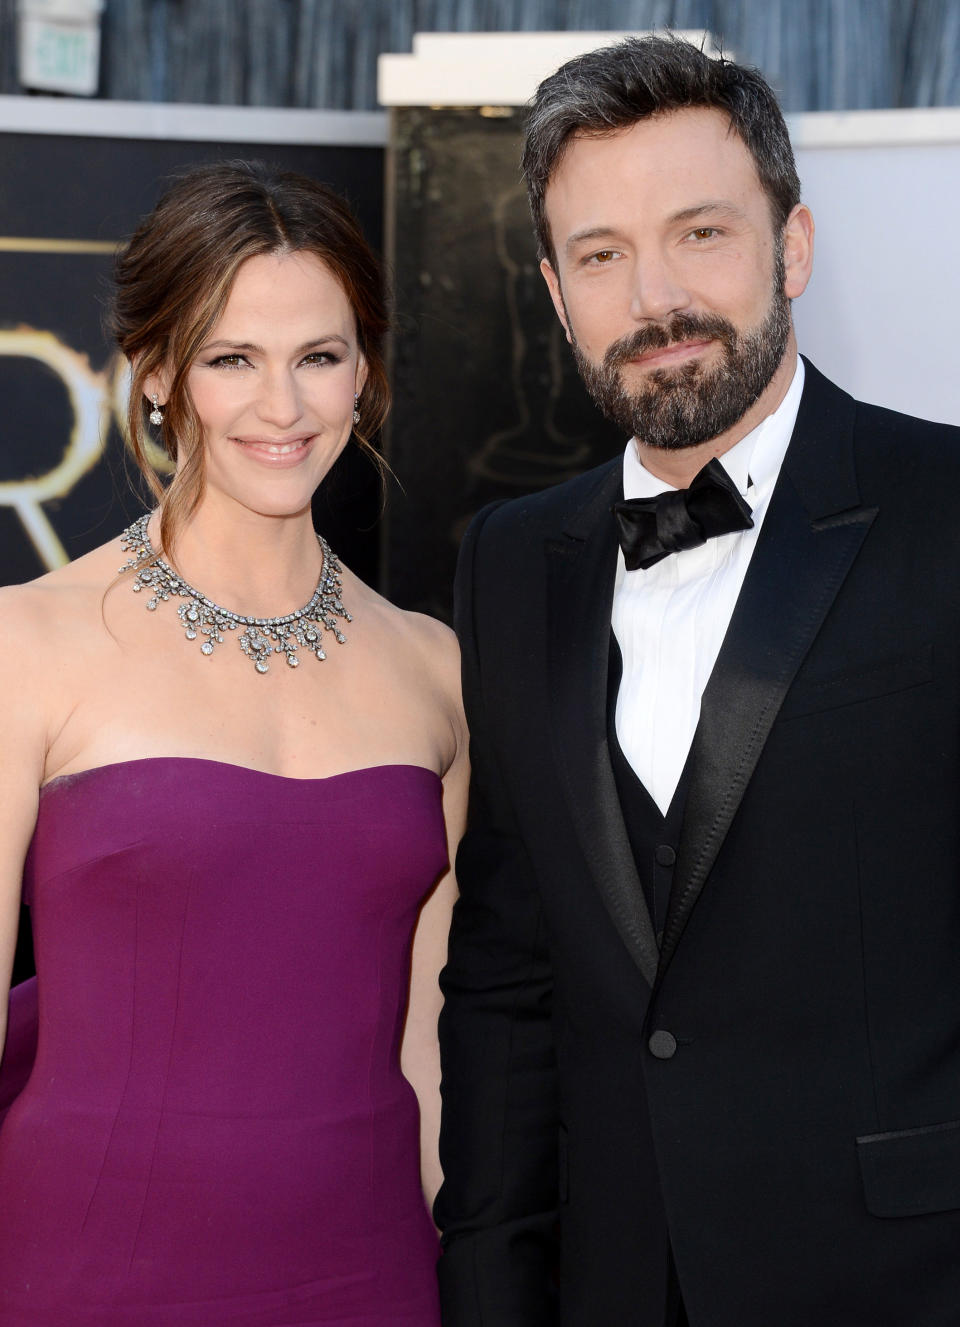 Ben Affleck revealed in 2017 that he and ex-wife Jennifer Garner "don't always agree" on parenting — she's strict about phones and computer use, he's not — but they have learned to work through their differences. "You have to be on the same page. You have to cooperate," the Batman actor told Today. "We're the only two people in the world who care this much about these three kids." The pair, who share Violet, Seraphina and Samuel, split in 2015 after 10 years of marriage.